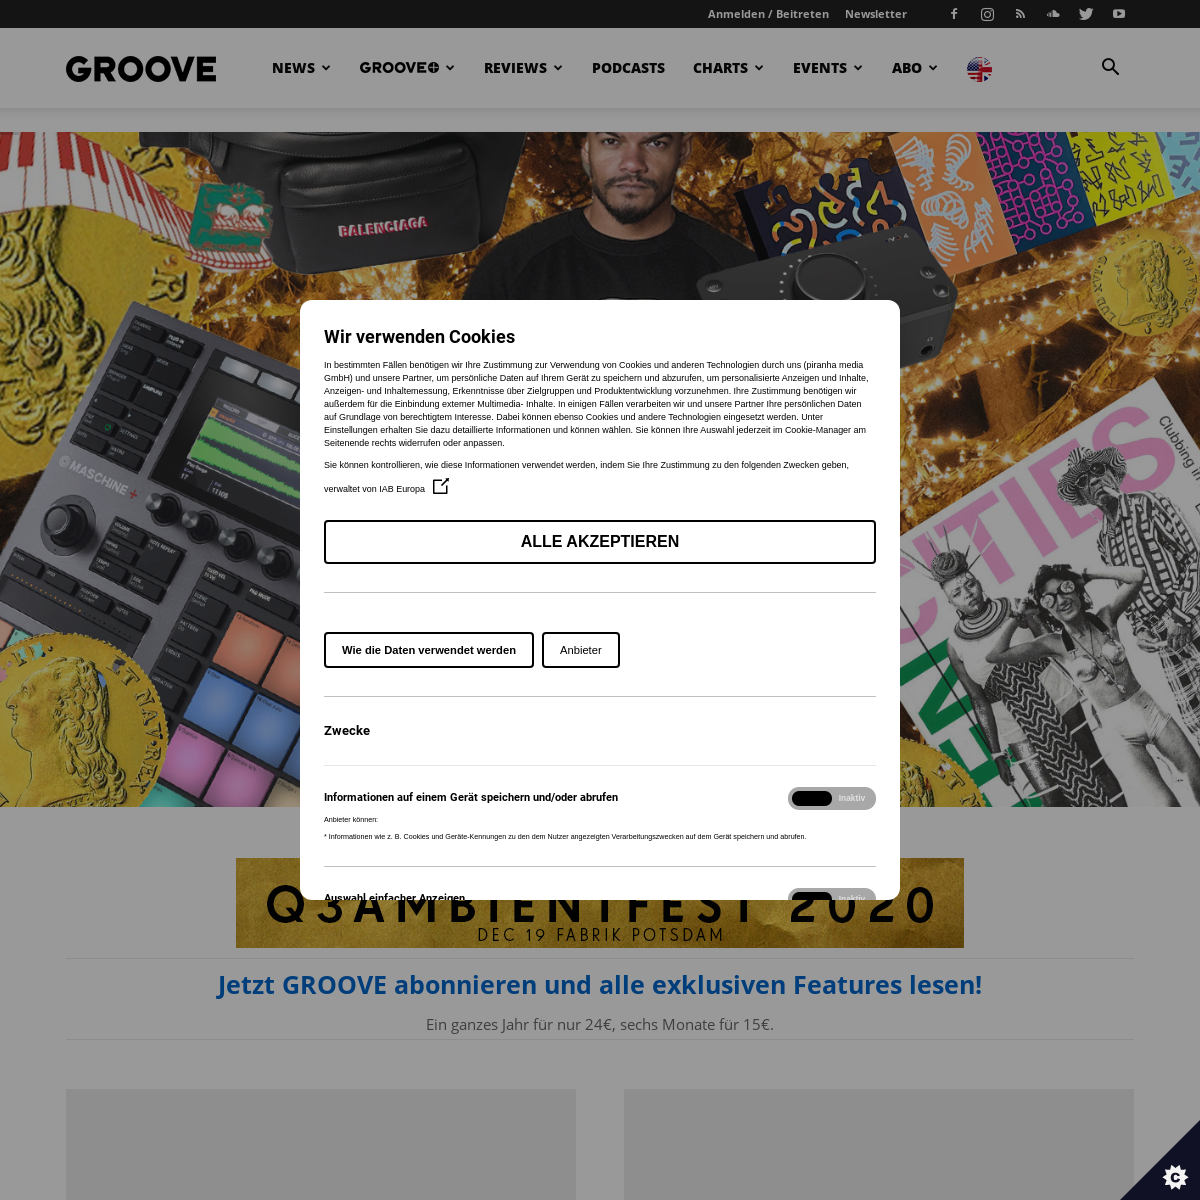 A complete backup of groove.de